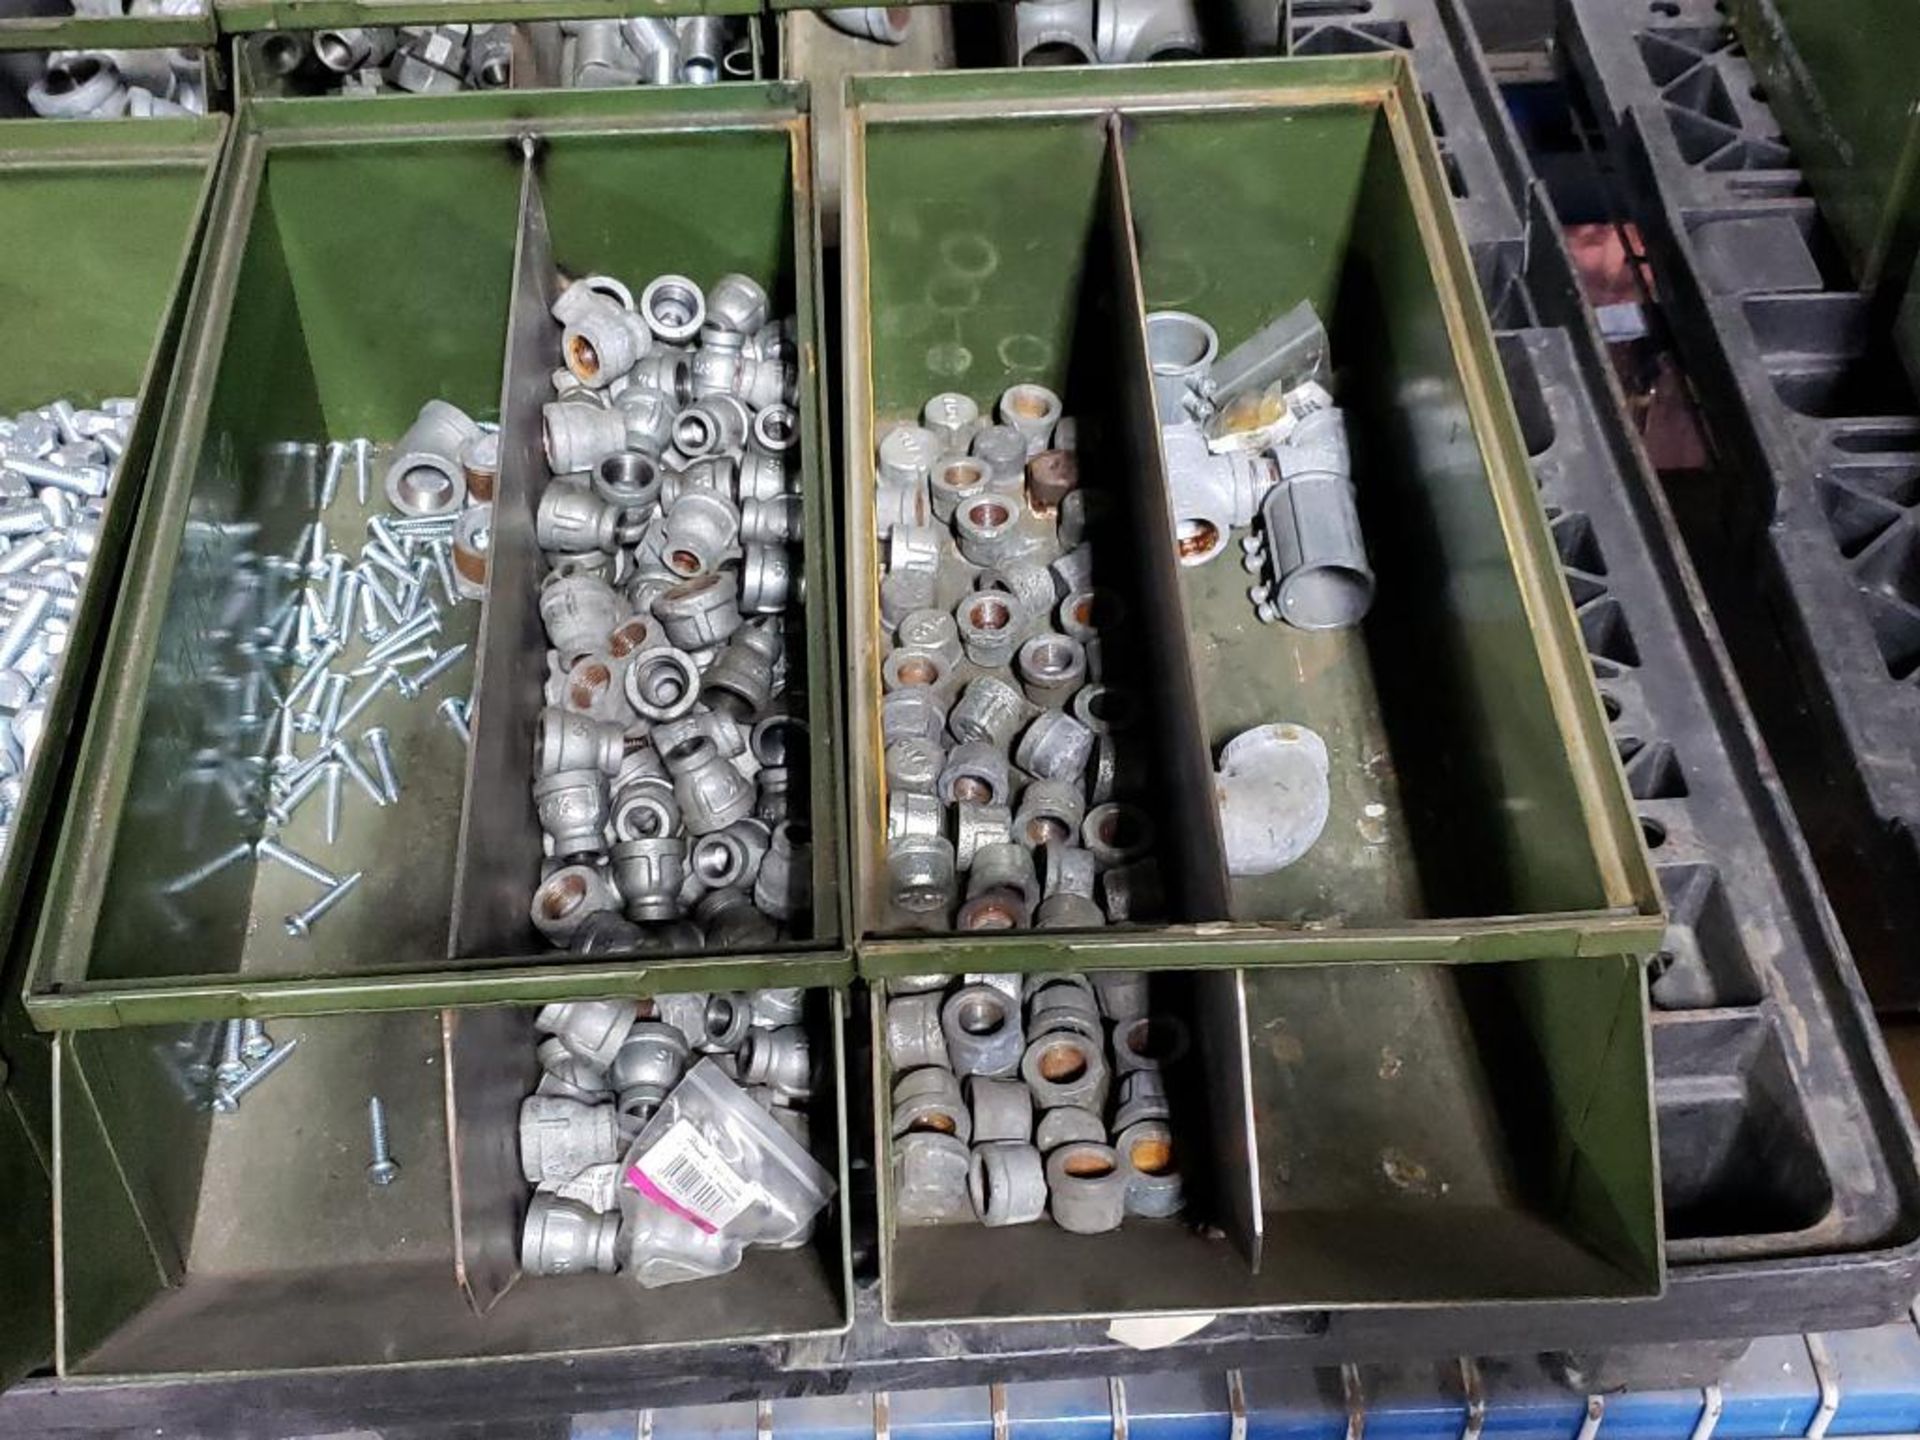 Pallet of assorted hardware and stack on bins. - Image 5 of 5